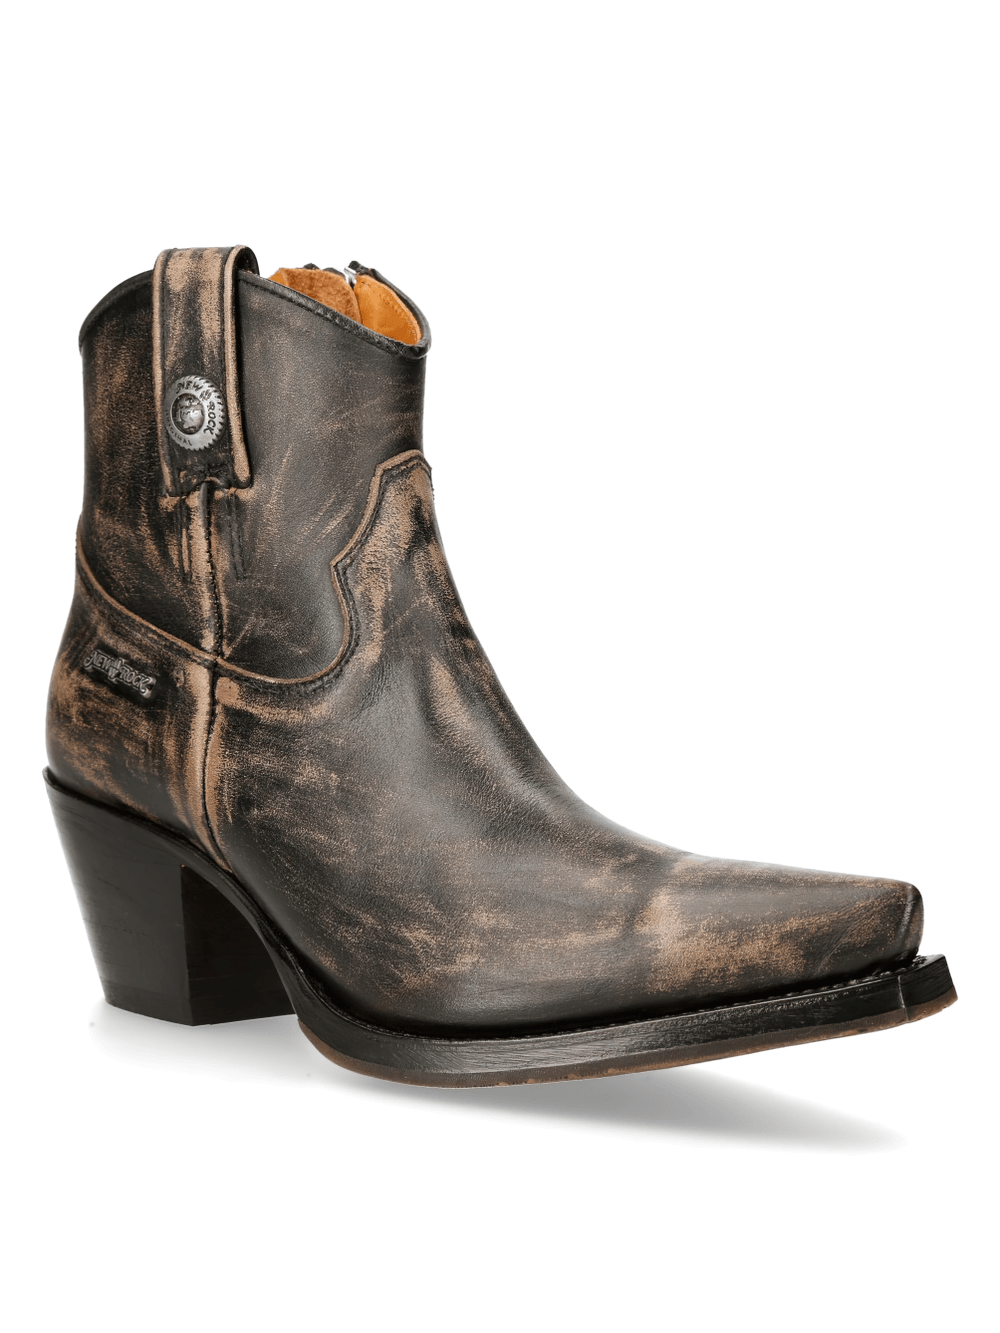 NEW ROCK Distressed Leather Ankle Boots with Zipper